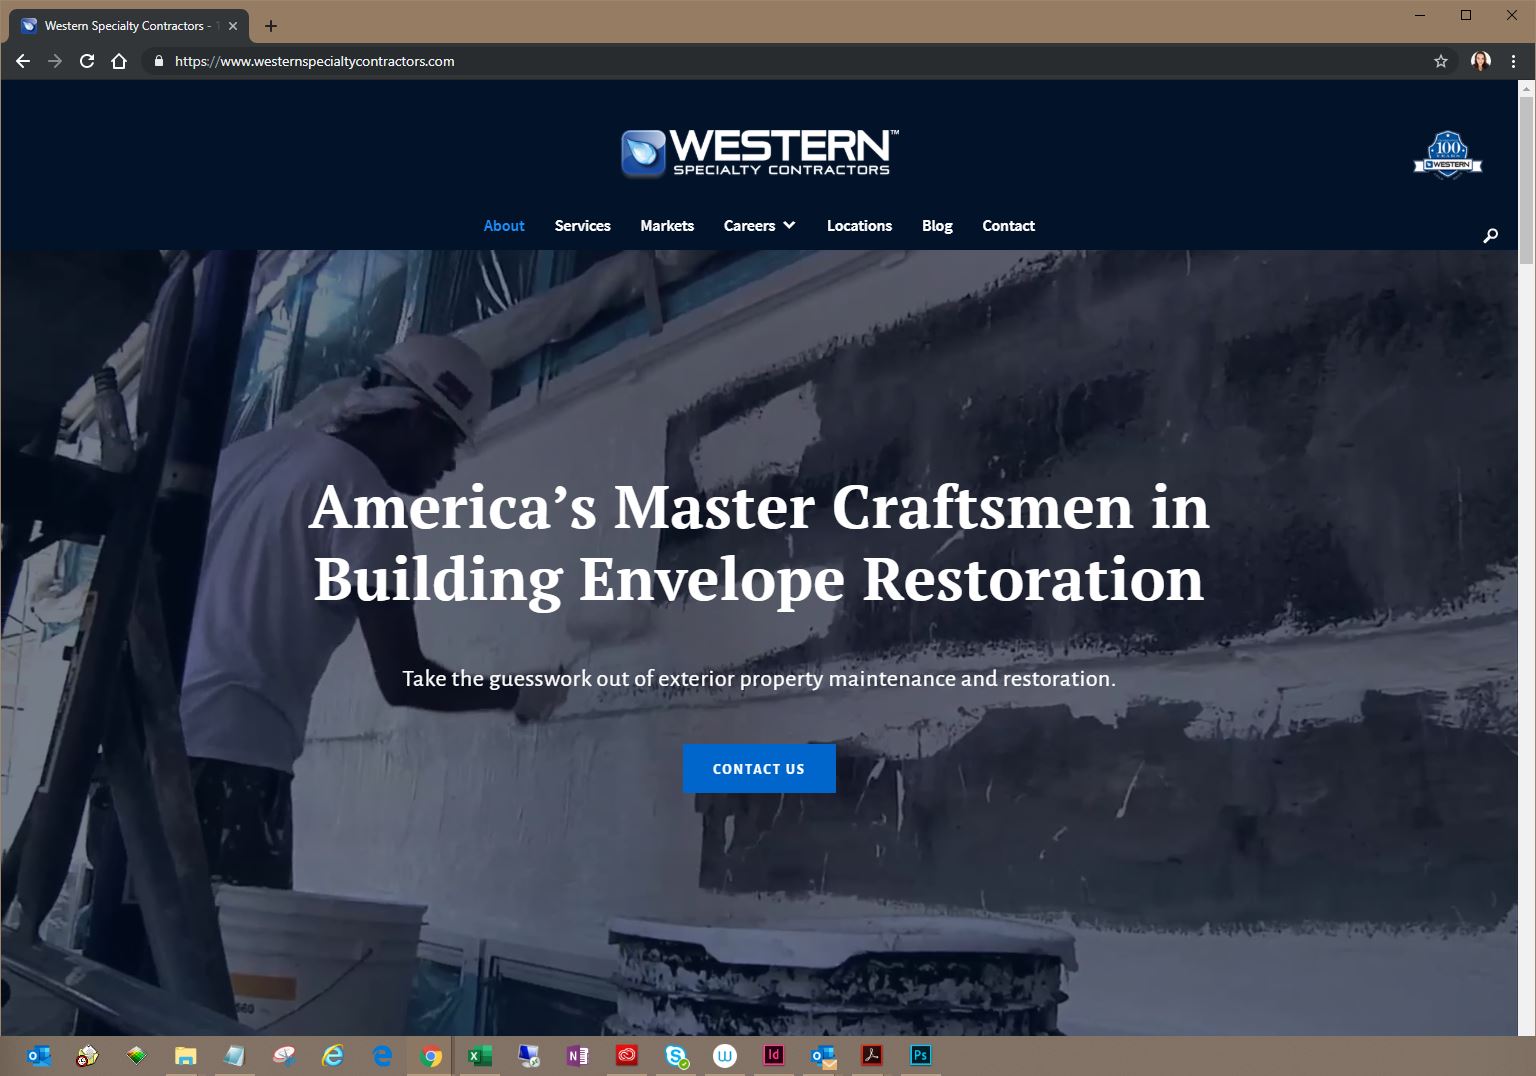 Western Specialty Contractors launches new website